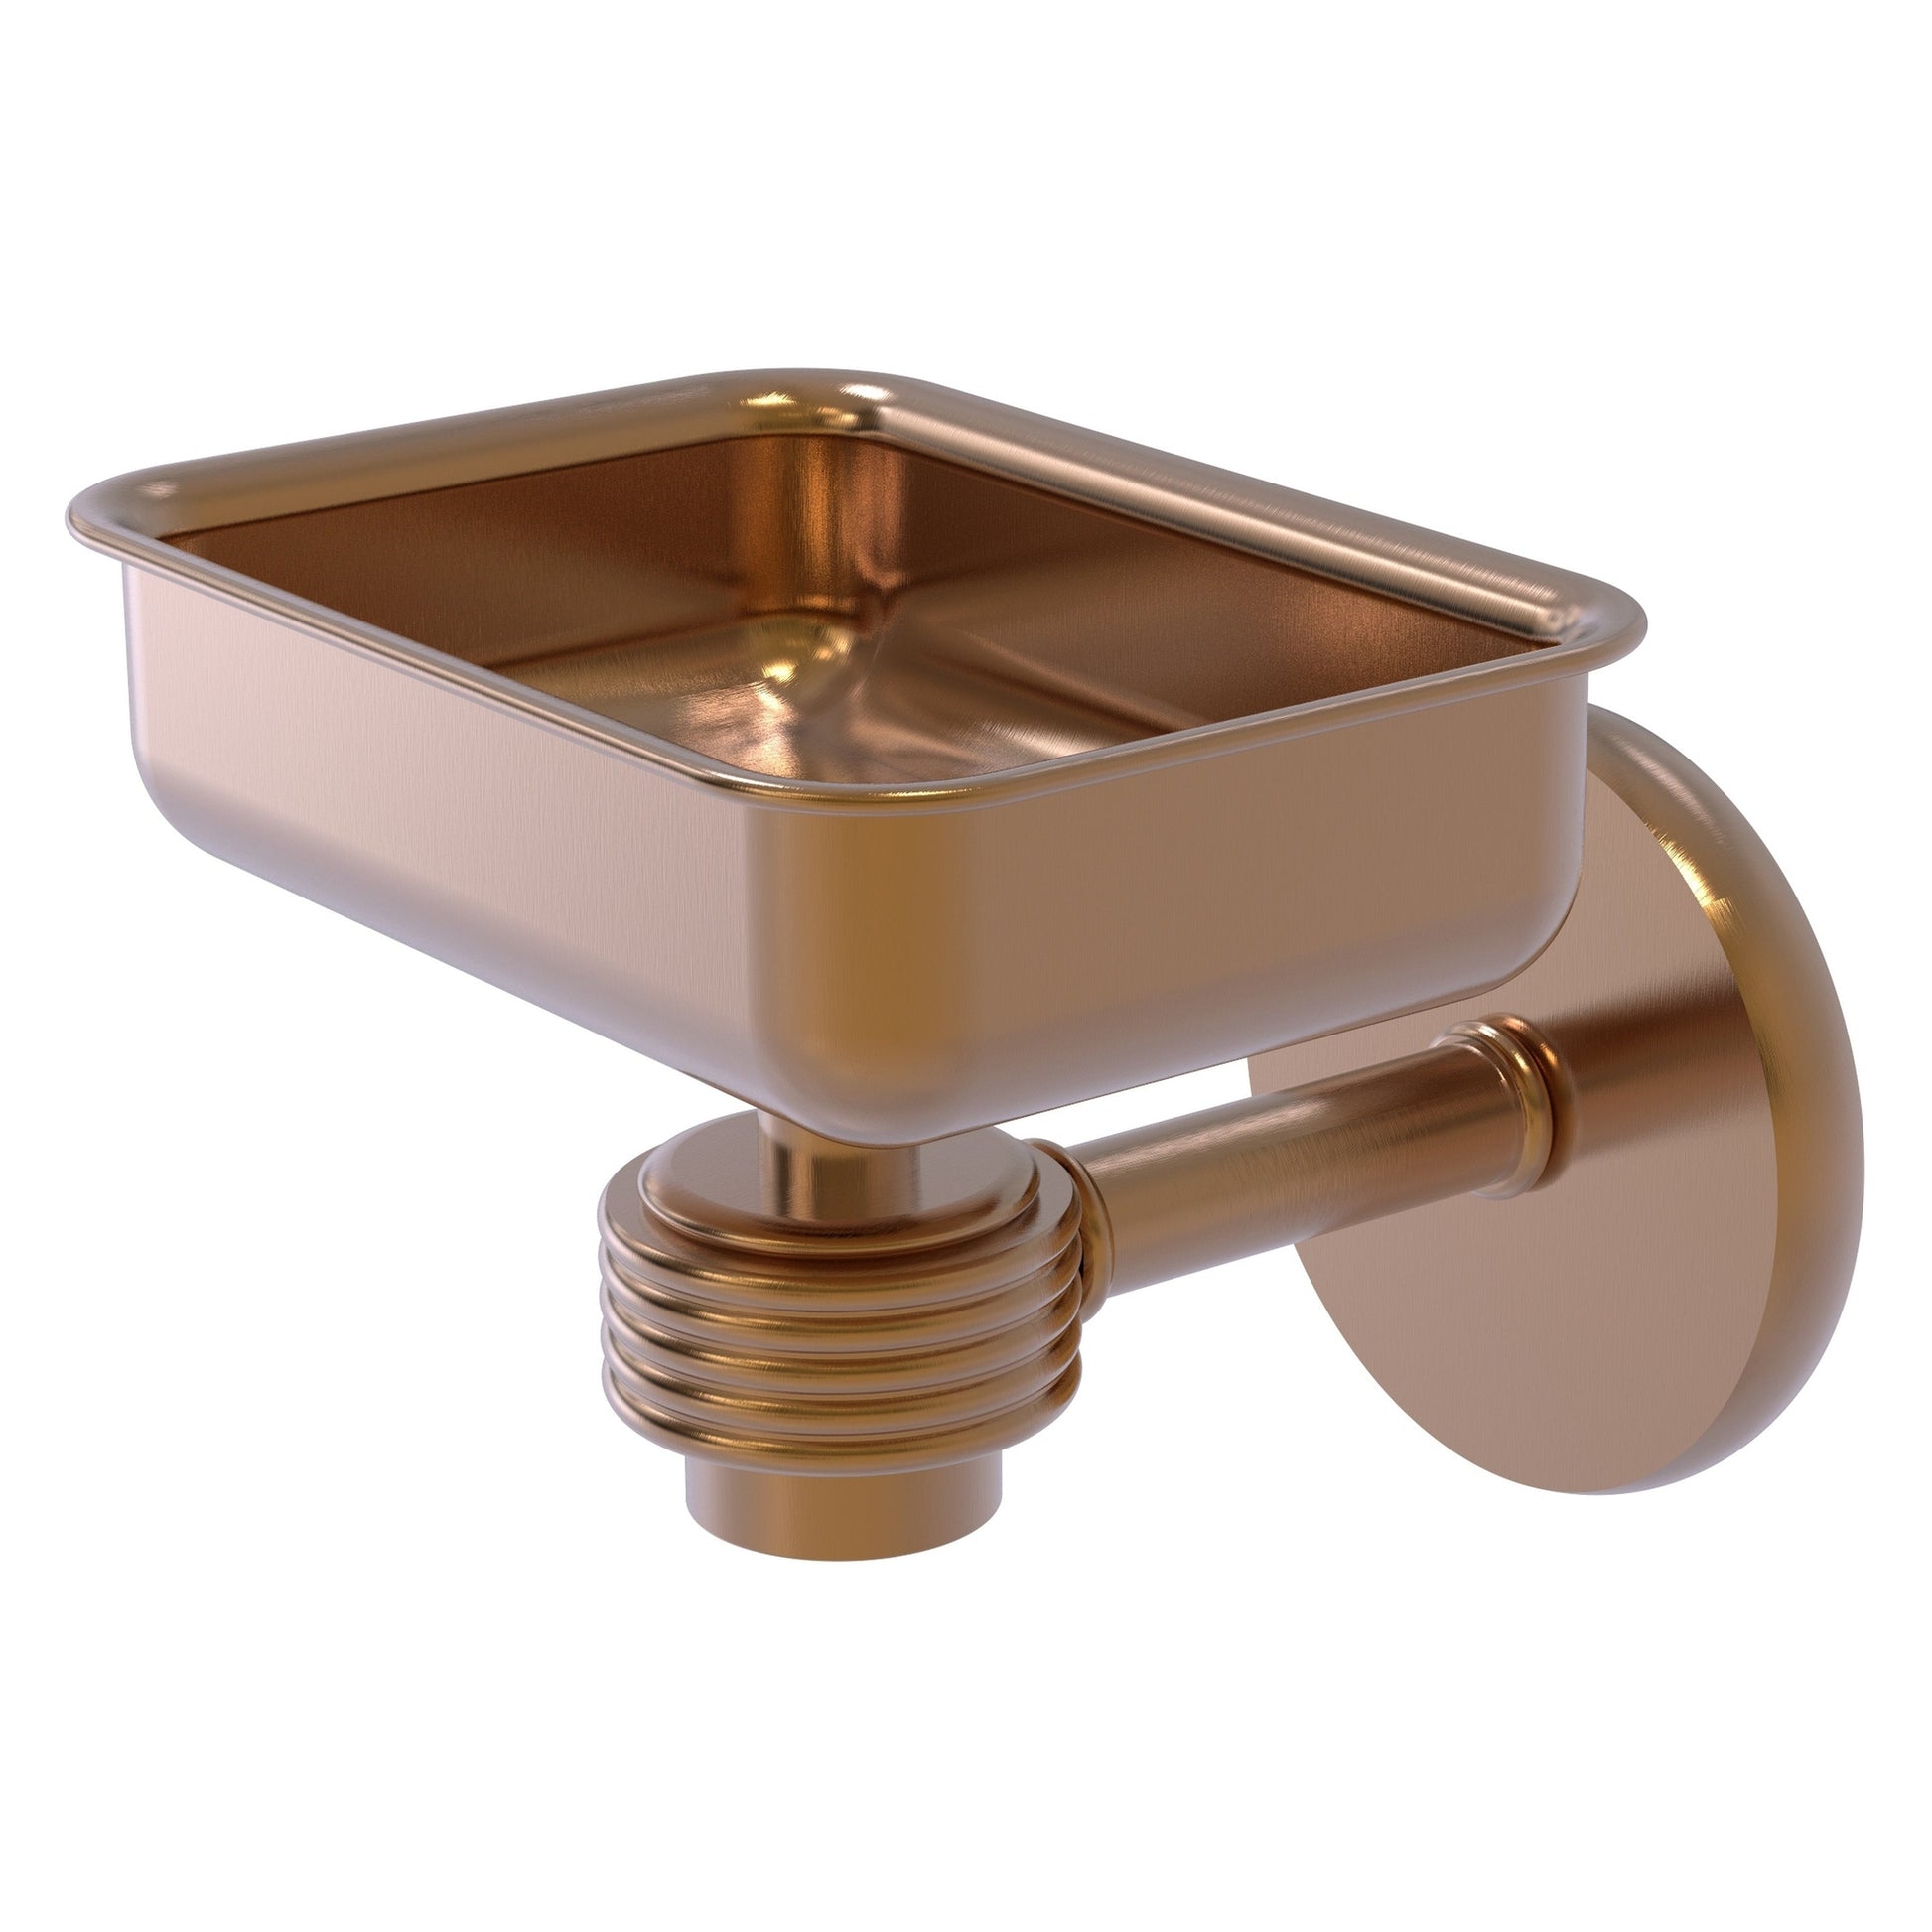 Allied Brass Satellite Orbit One 4.5" x 3.5" Brushed Bronze Solid Brass Wall-Mounted Soap Dish With Grooved Accents